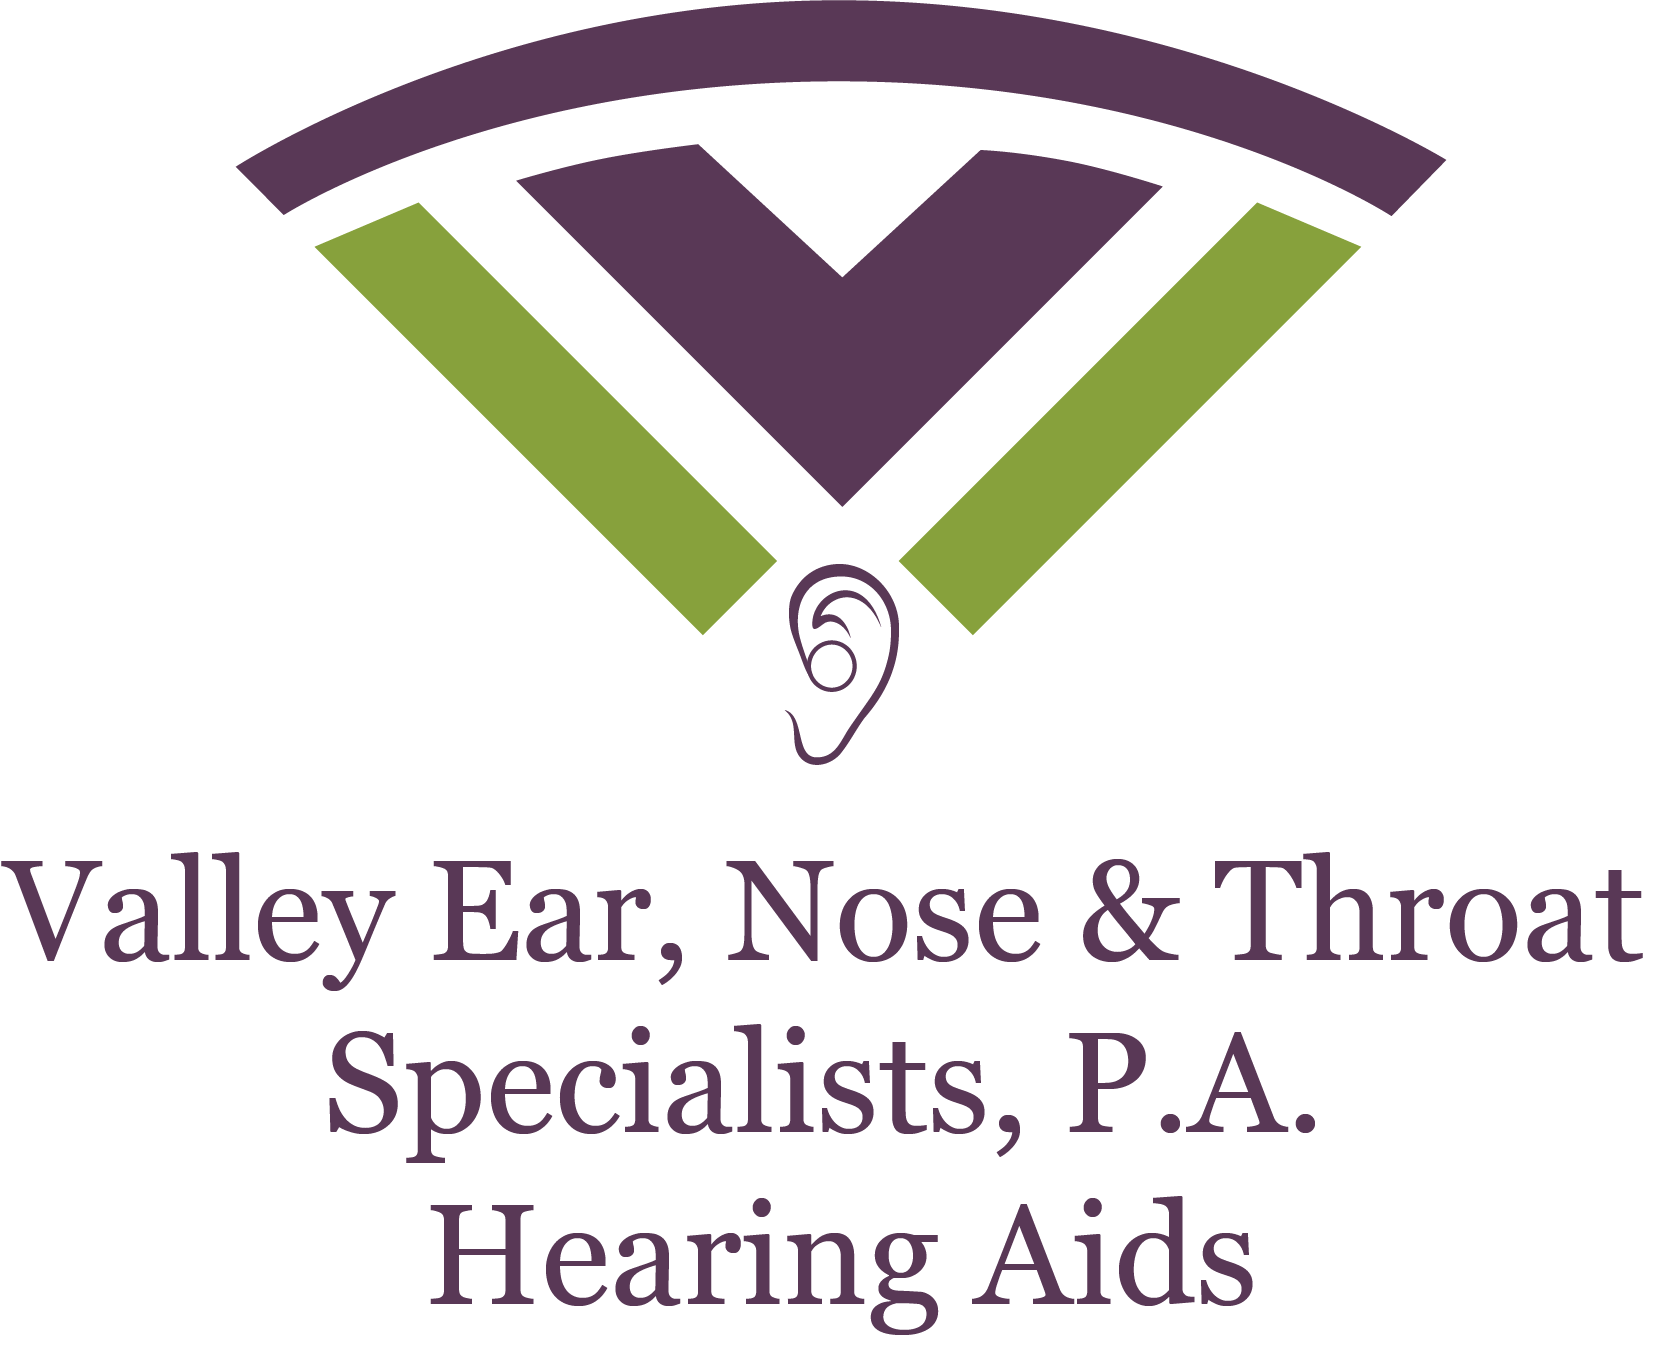 Valley Ear, Nose & Throat Specialists, P.A. Hearing Aids